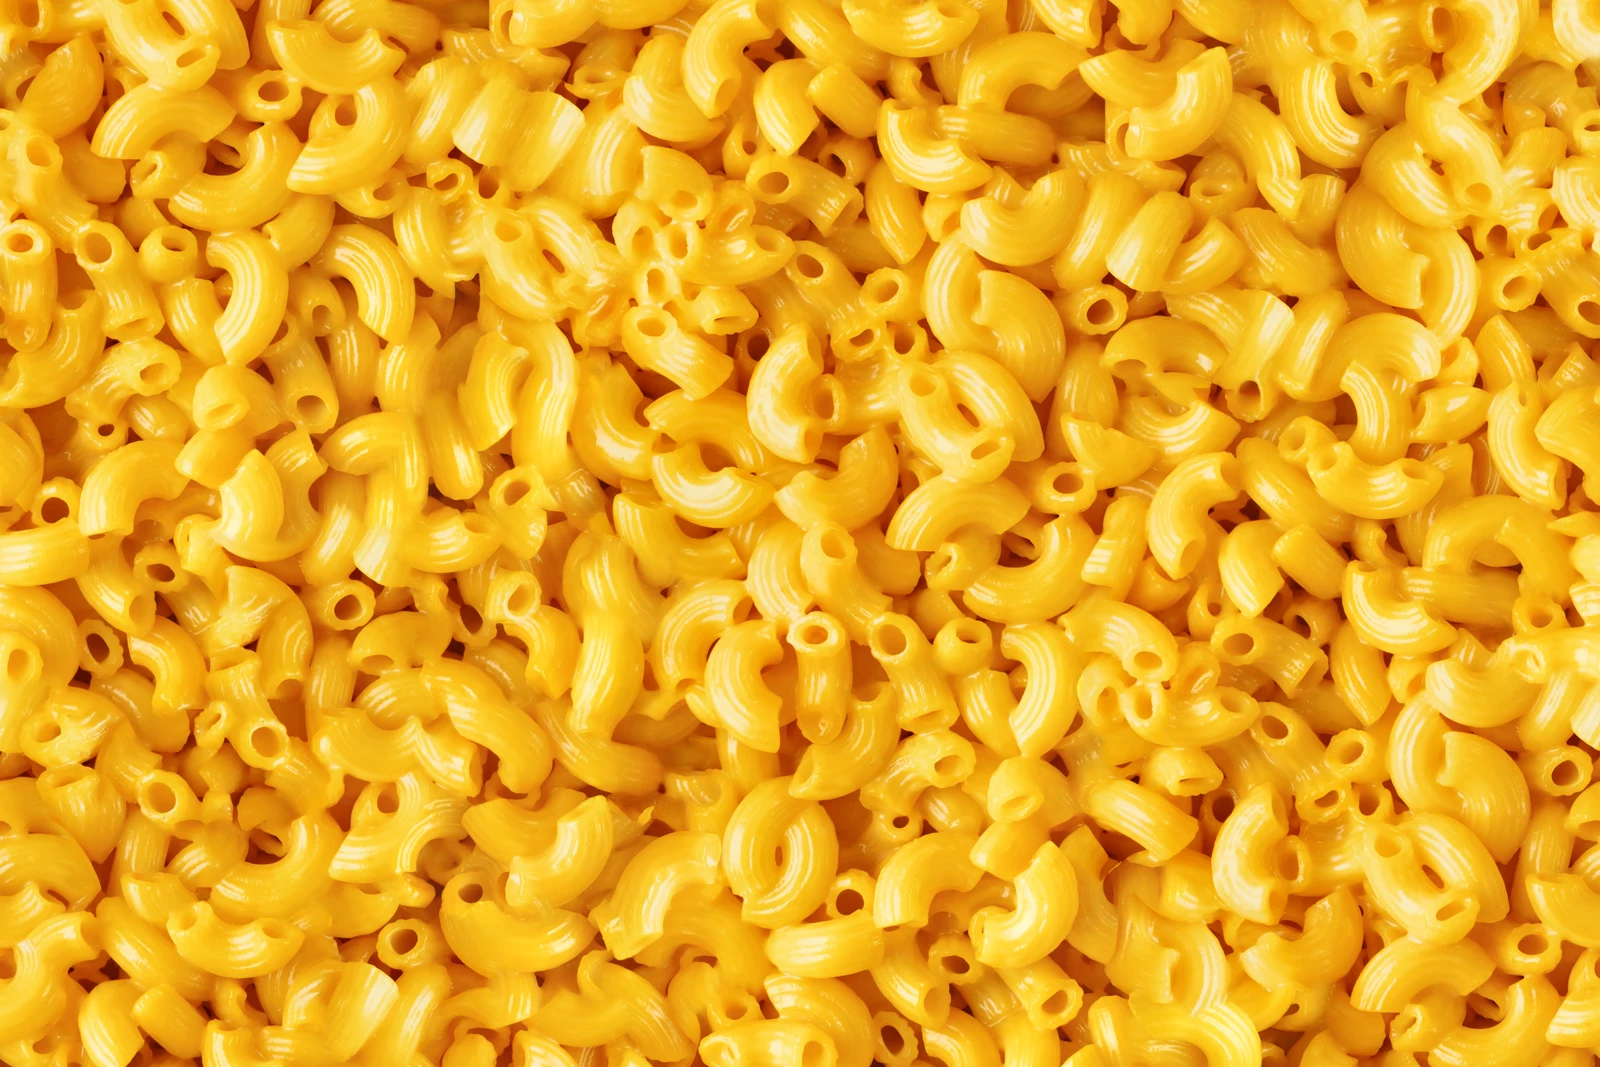 The QC Can Now Buy Costco's 27-Pound Bucket of Mac and Cheese